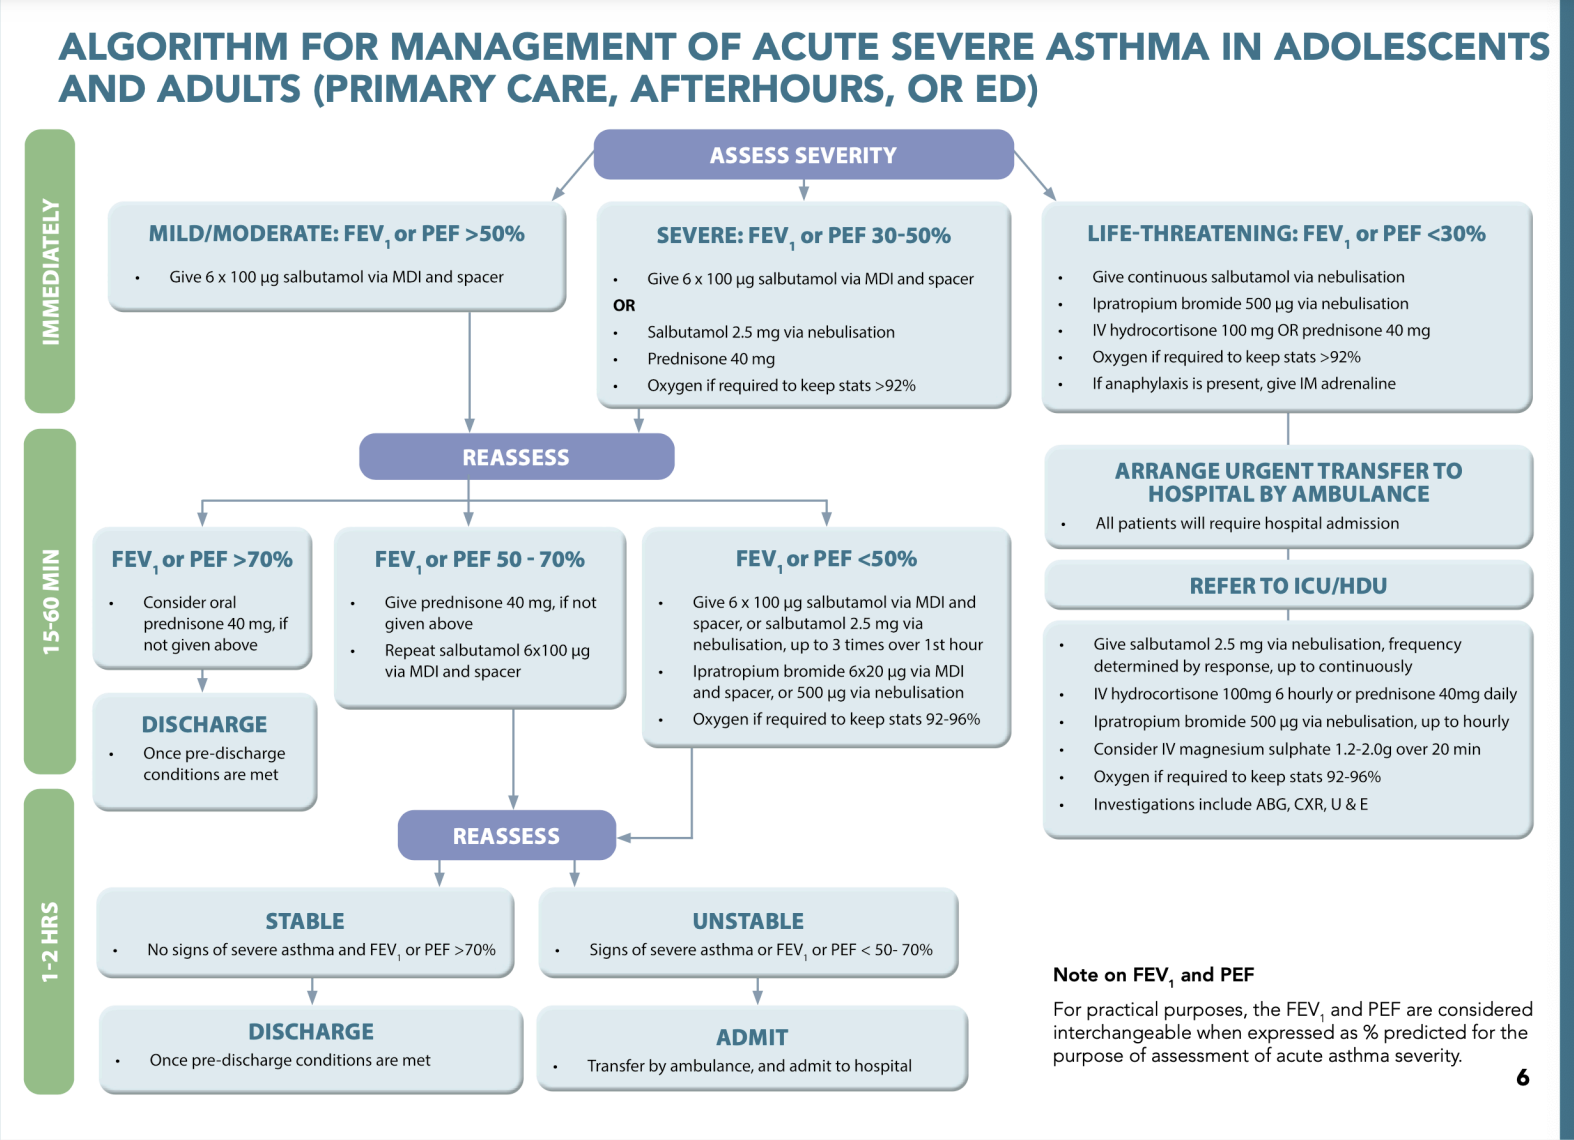 Adolescent and Adult Acute Asthma Management Flowchart